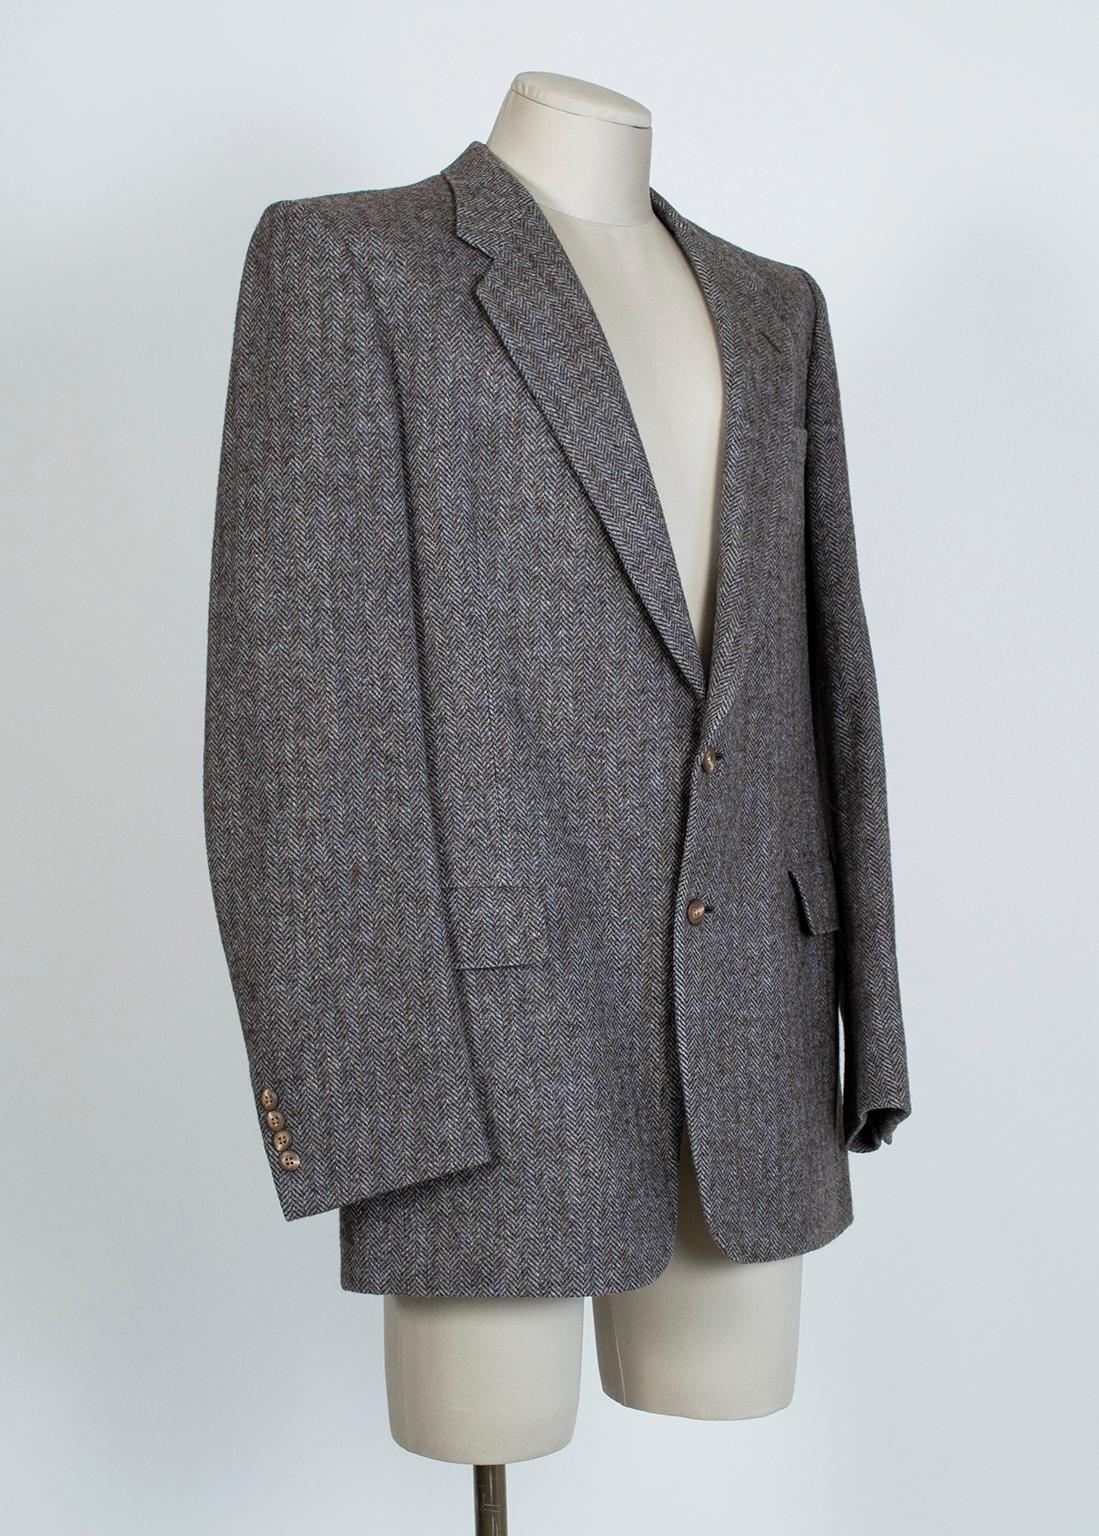 A wardrobe essential for a well-dressed man, a herringbone sport jacket is like an old friend who will never let you down. This one, with its impressionist combination of gray, brown and blue, pairs beautifully with a multitude of colors and